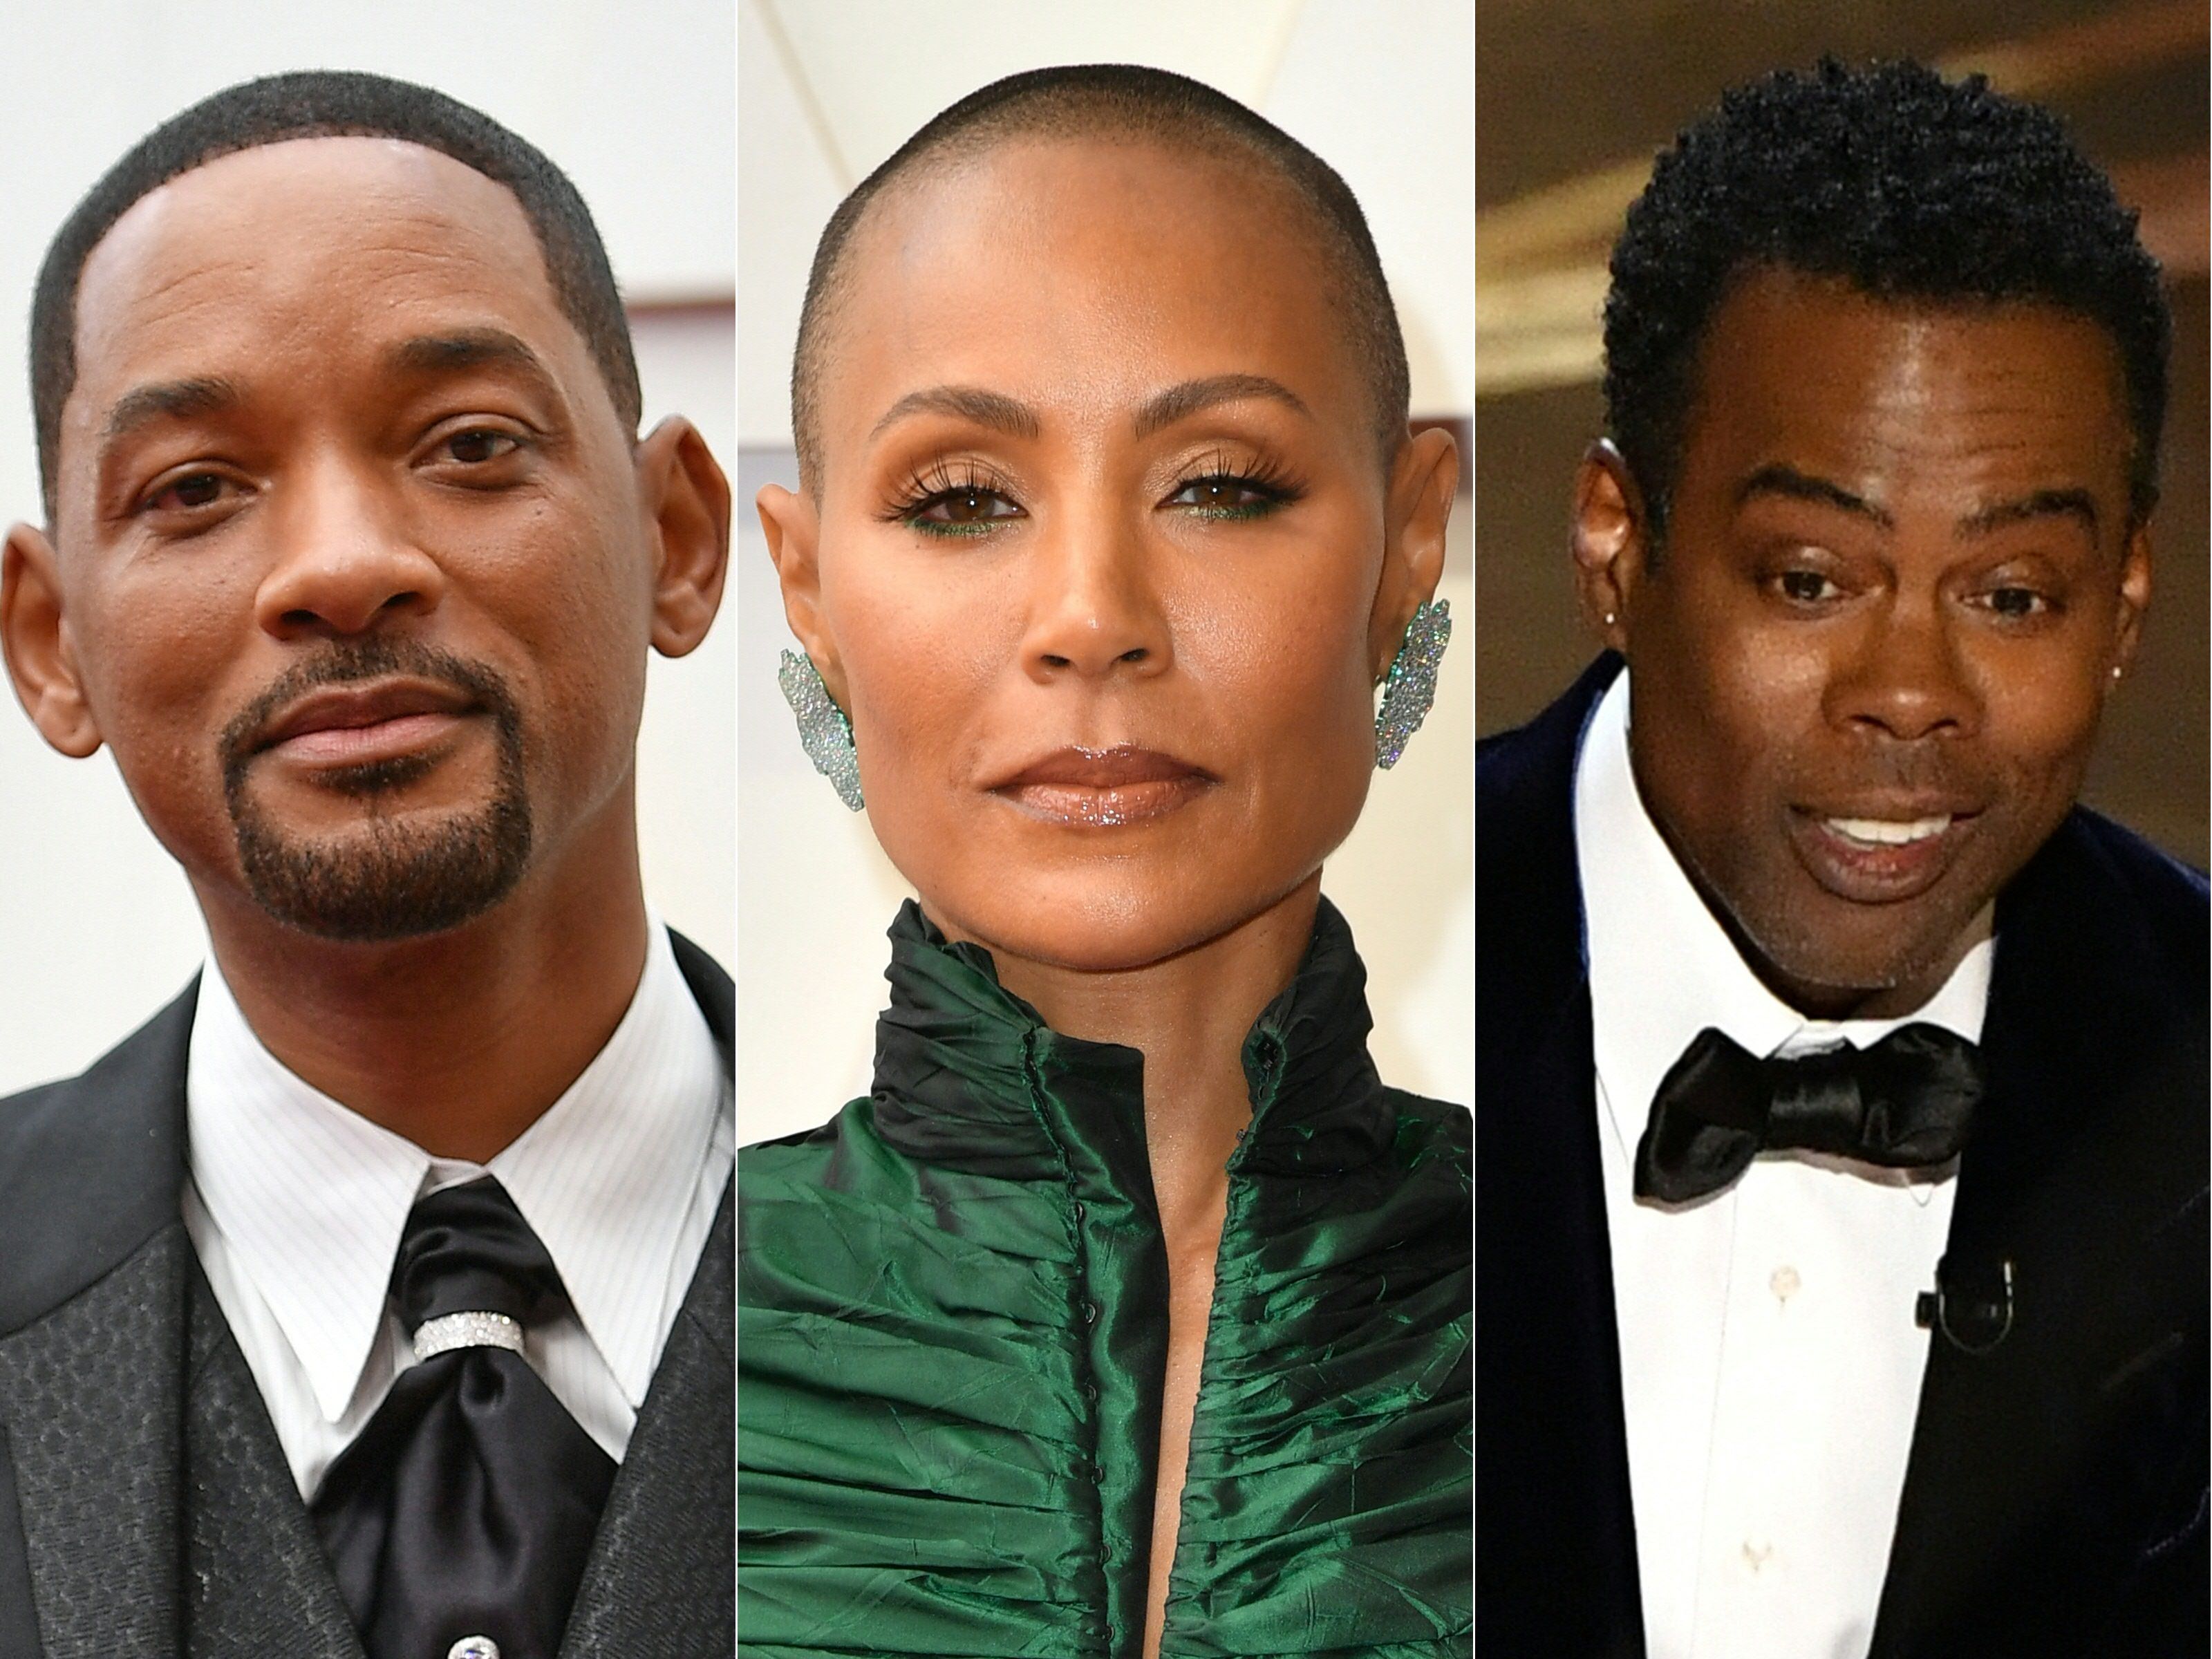 Why Will Smith Slapped Chris Rock Over Jada Pinkett-GI Jane 2 Joke- All You Need To Know About Alopecia